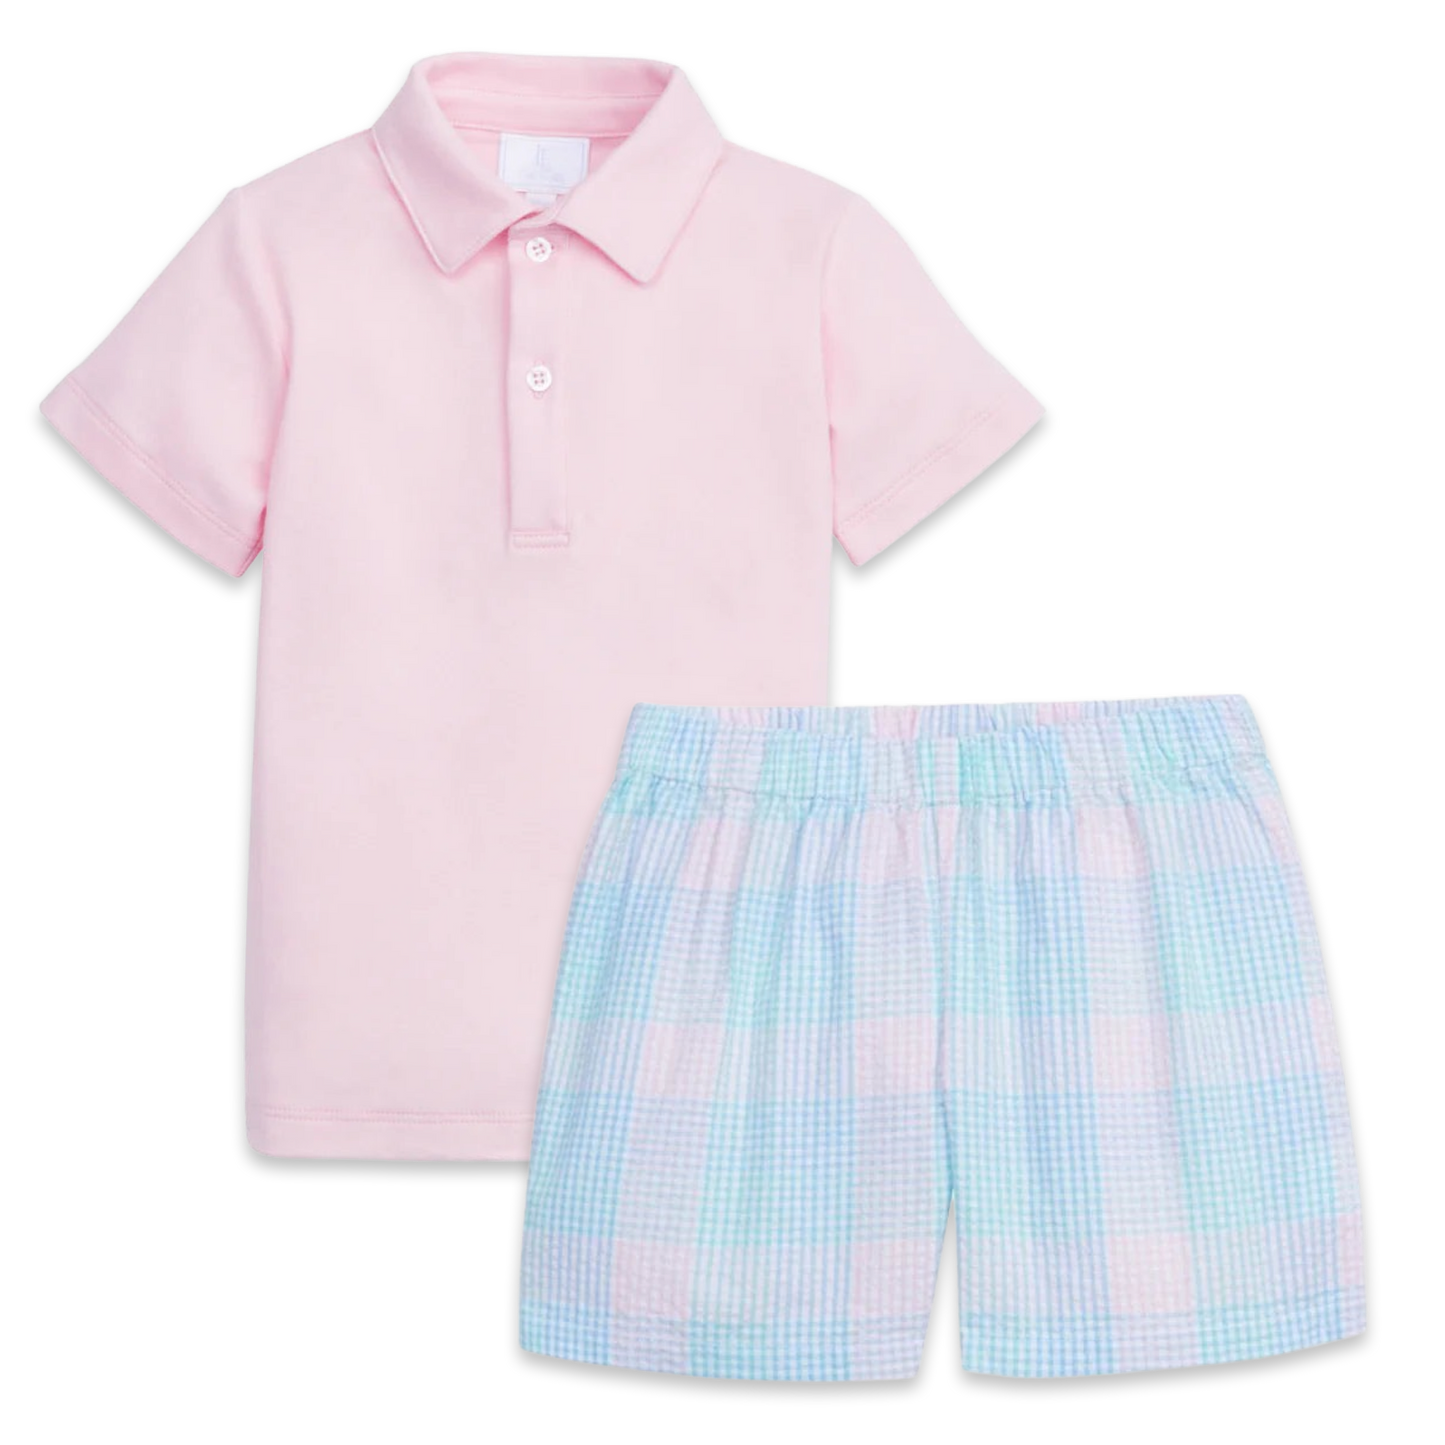 Little English Polo - Lt. Pink